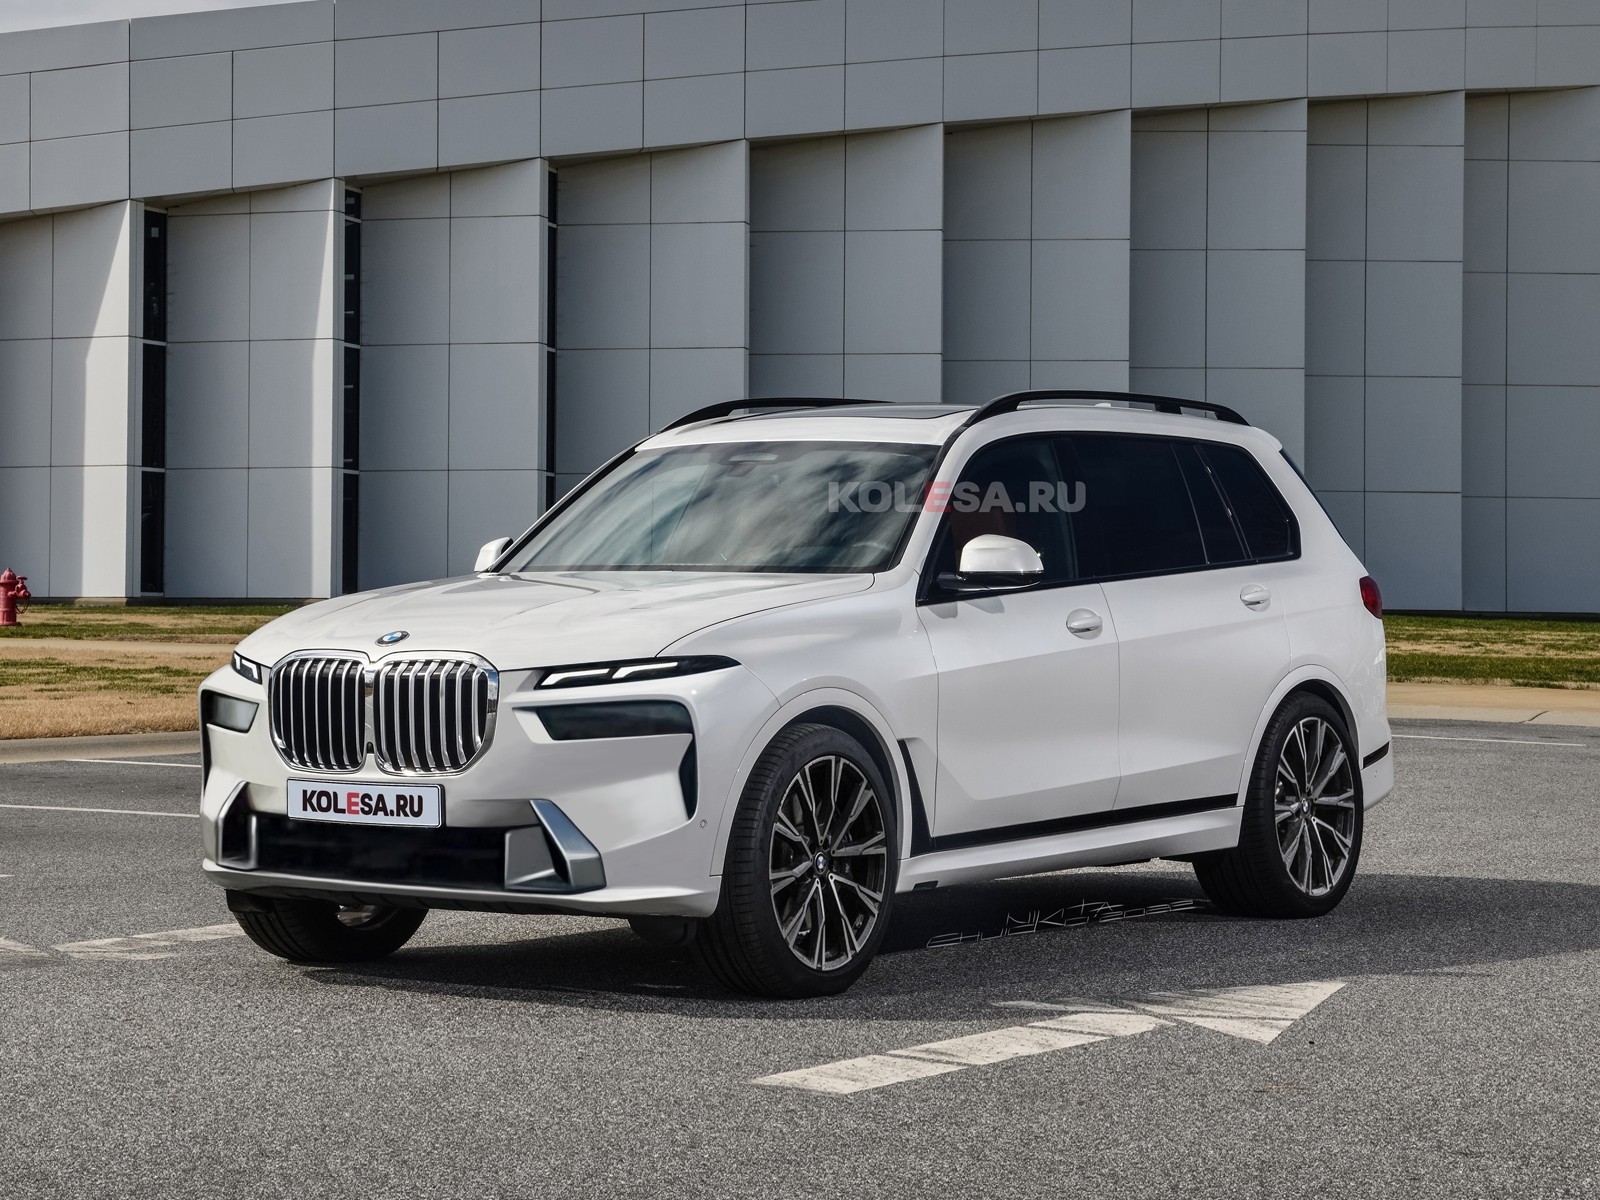 https://s1.cdn.autoevolution.com/images/news/gallery/2023-bmw-x7-aint-that-ugly-after-all-is-it_1.jpg